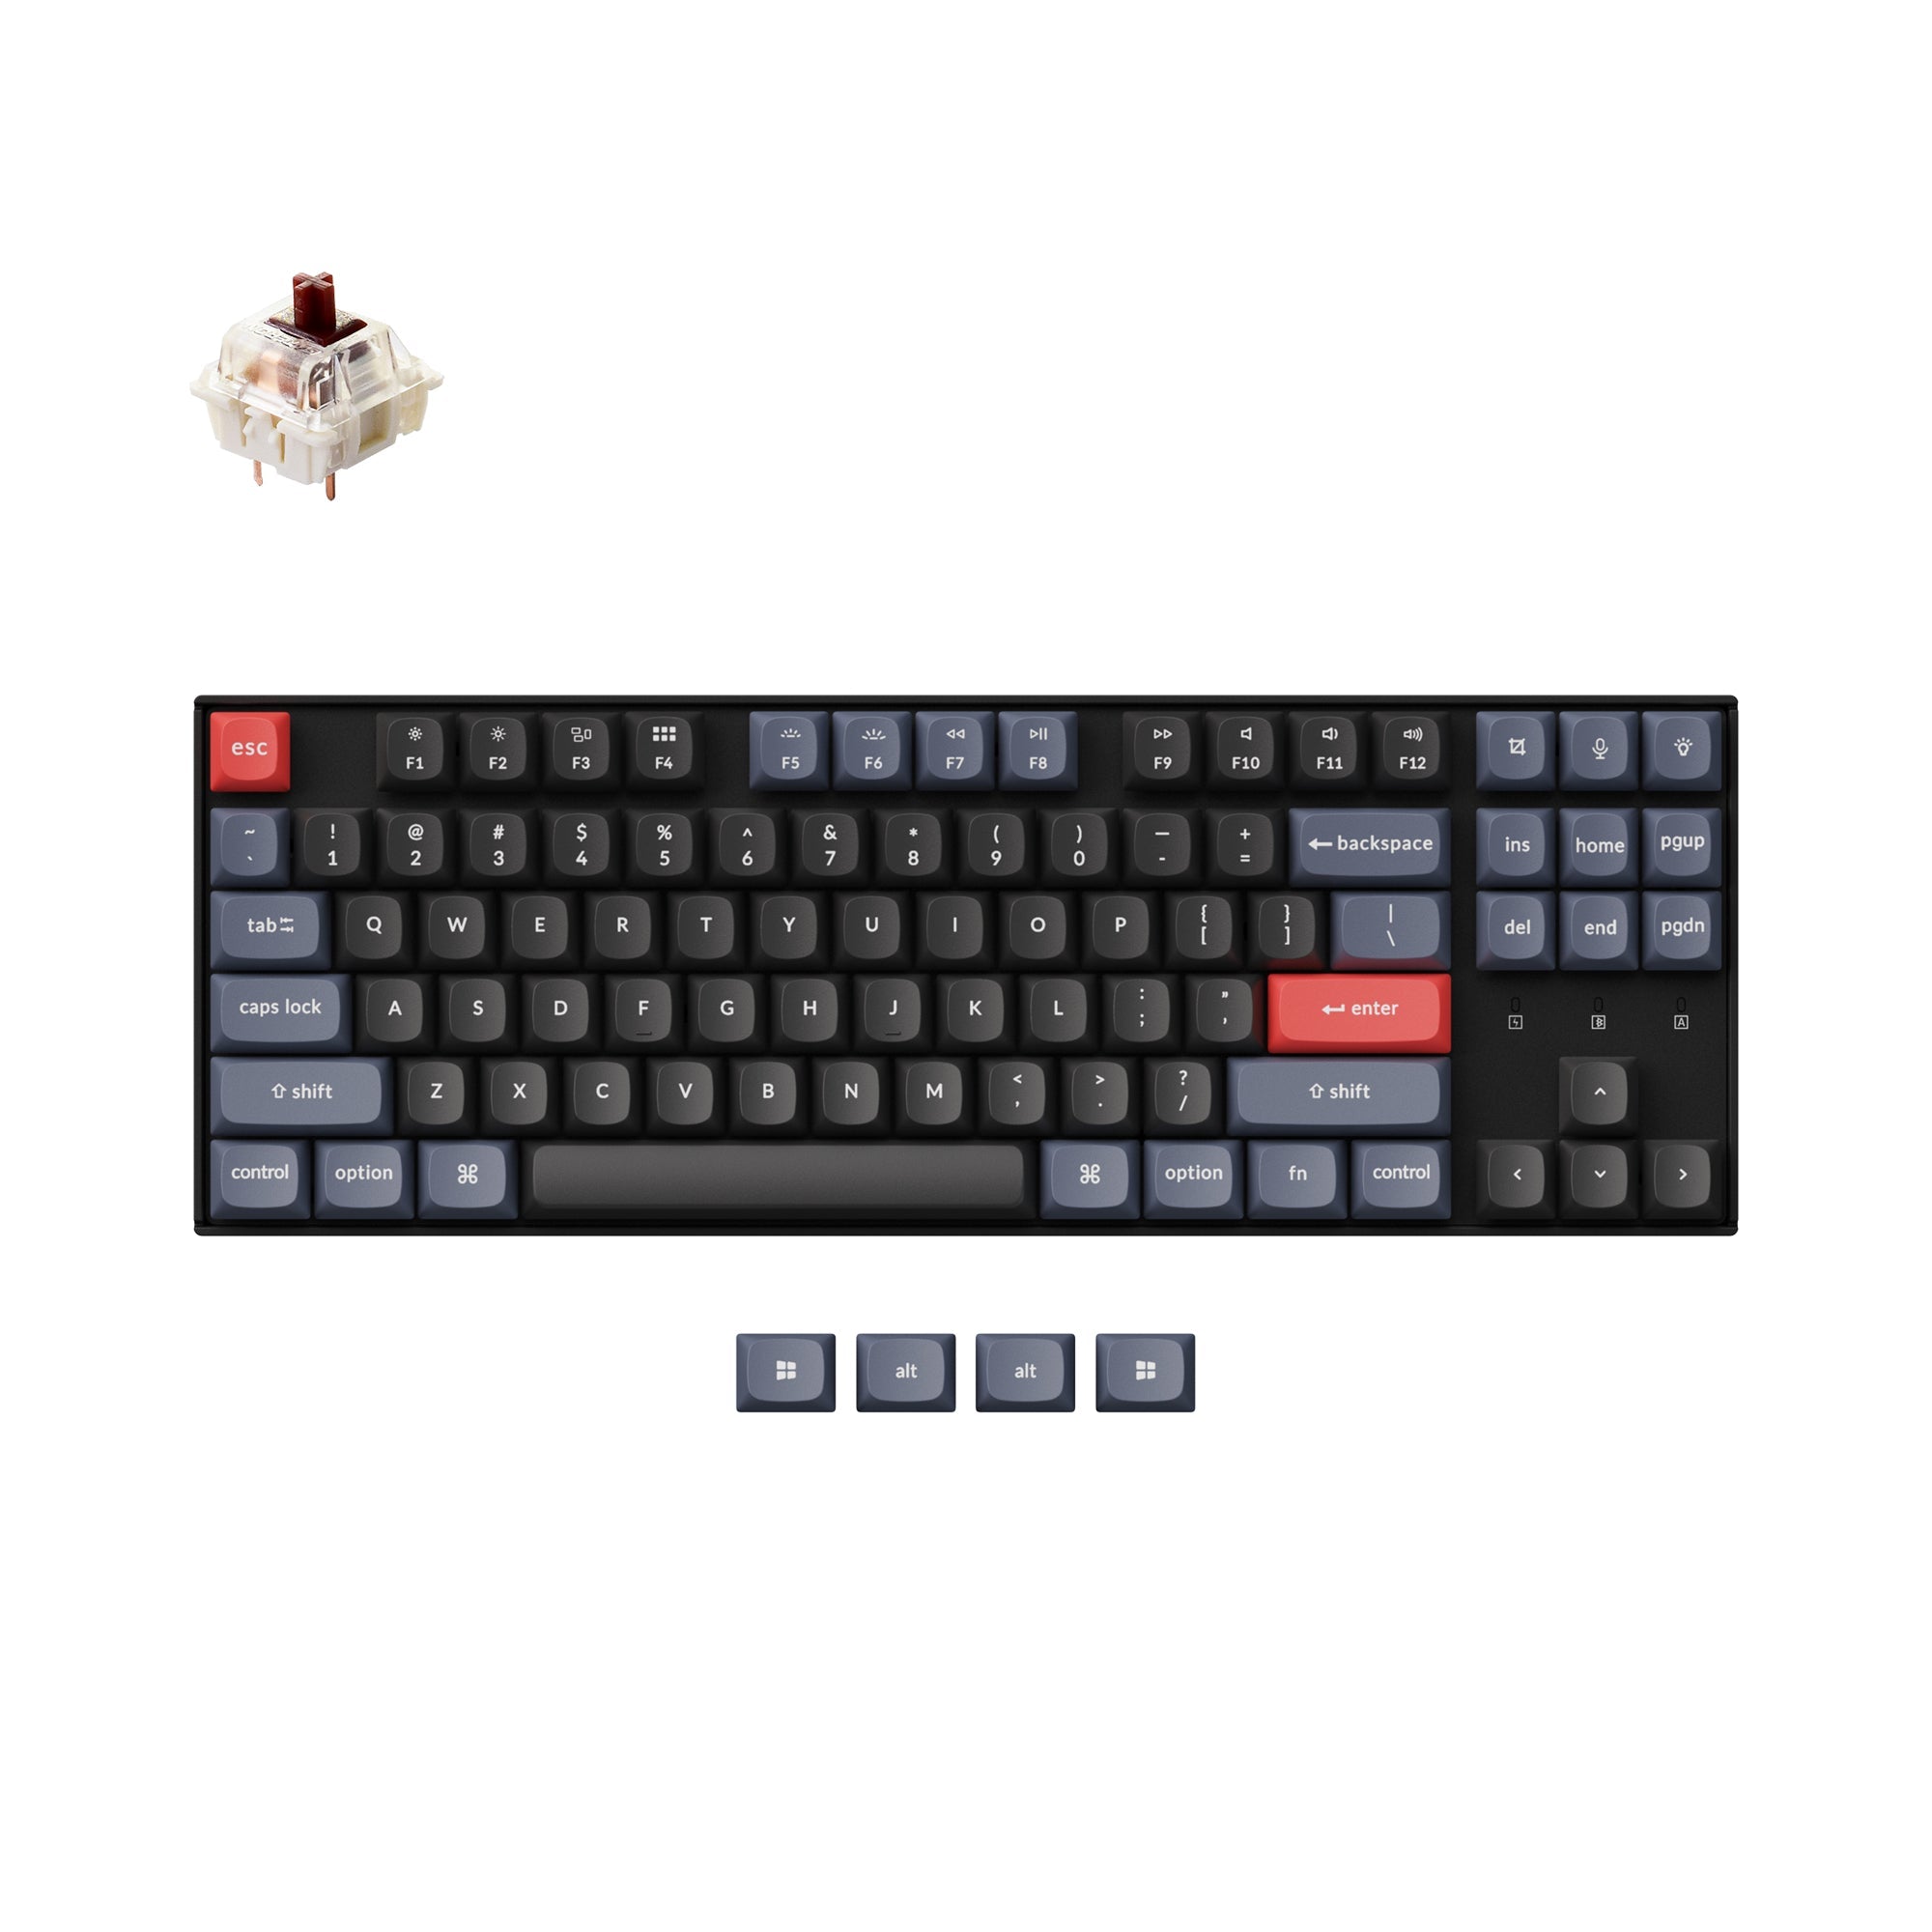 Keychron K8 Pro QMK/VIA Wireless Mechanical Keyboard for Mac and Windows PBT keycaps with PCB screw-in stabilizer and hot-swappable Gateron G Pro mechanical brown switch